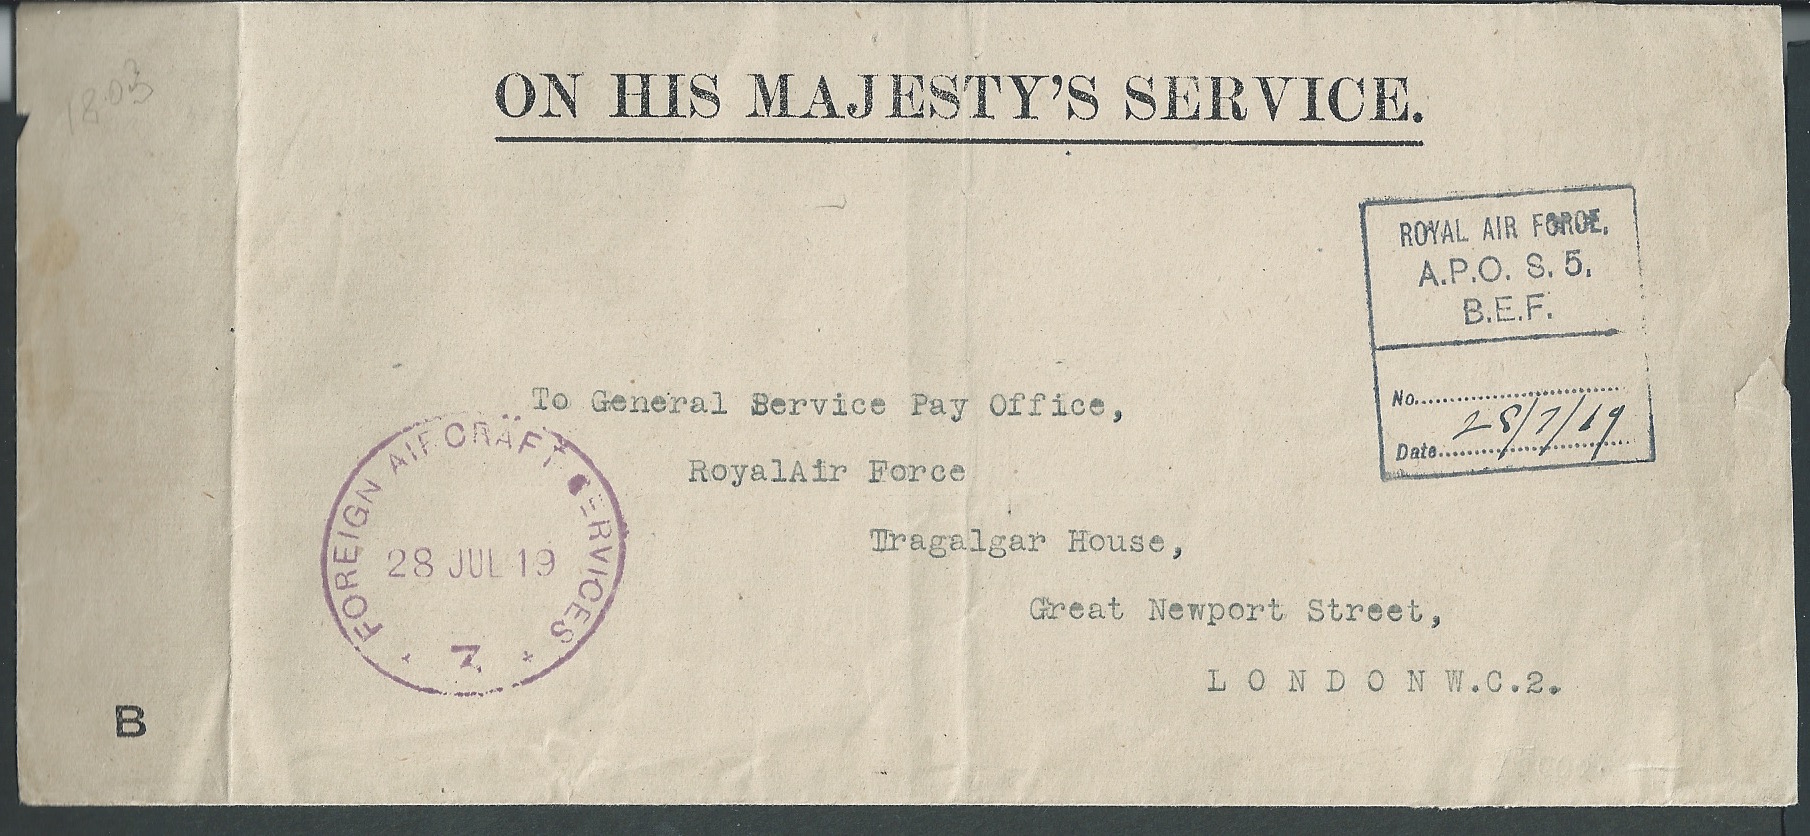 G.B. - Air Mails / World War One / France 1919 (July 28) Stampless O.H.M.S. cover flown by R.A.F., a